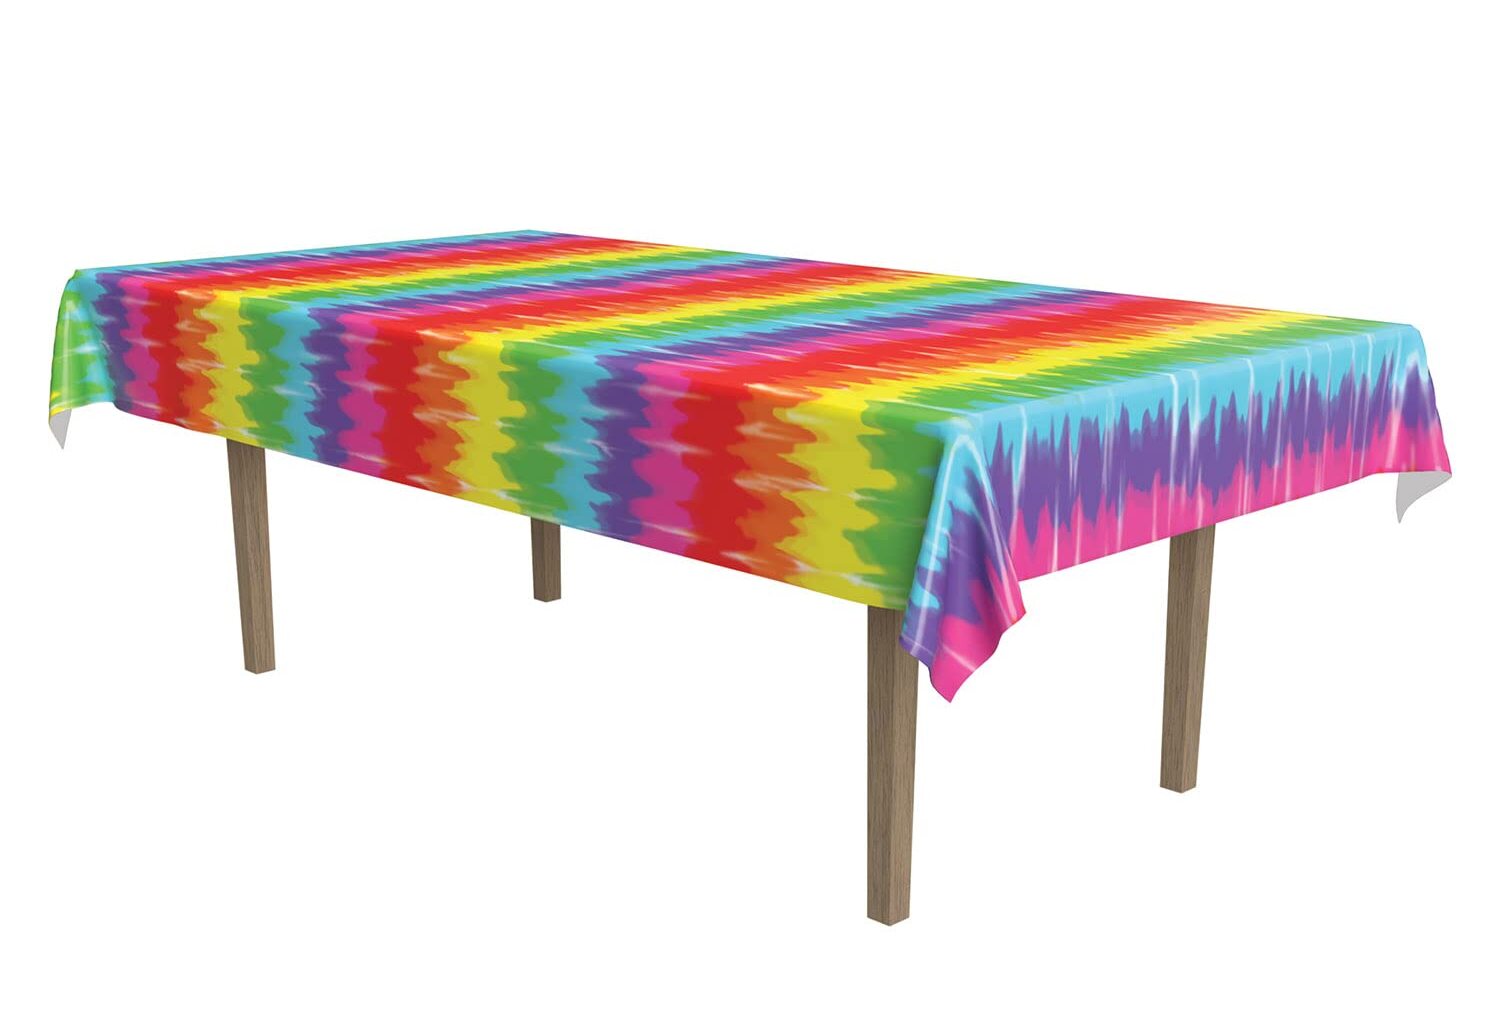 How To Tie-Dye A Tablecloth | Storables